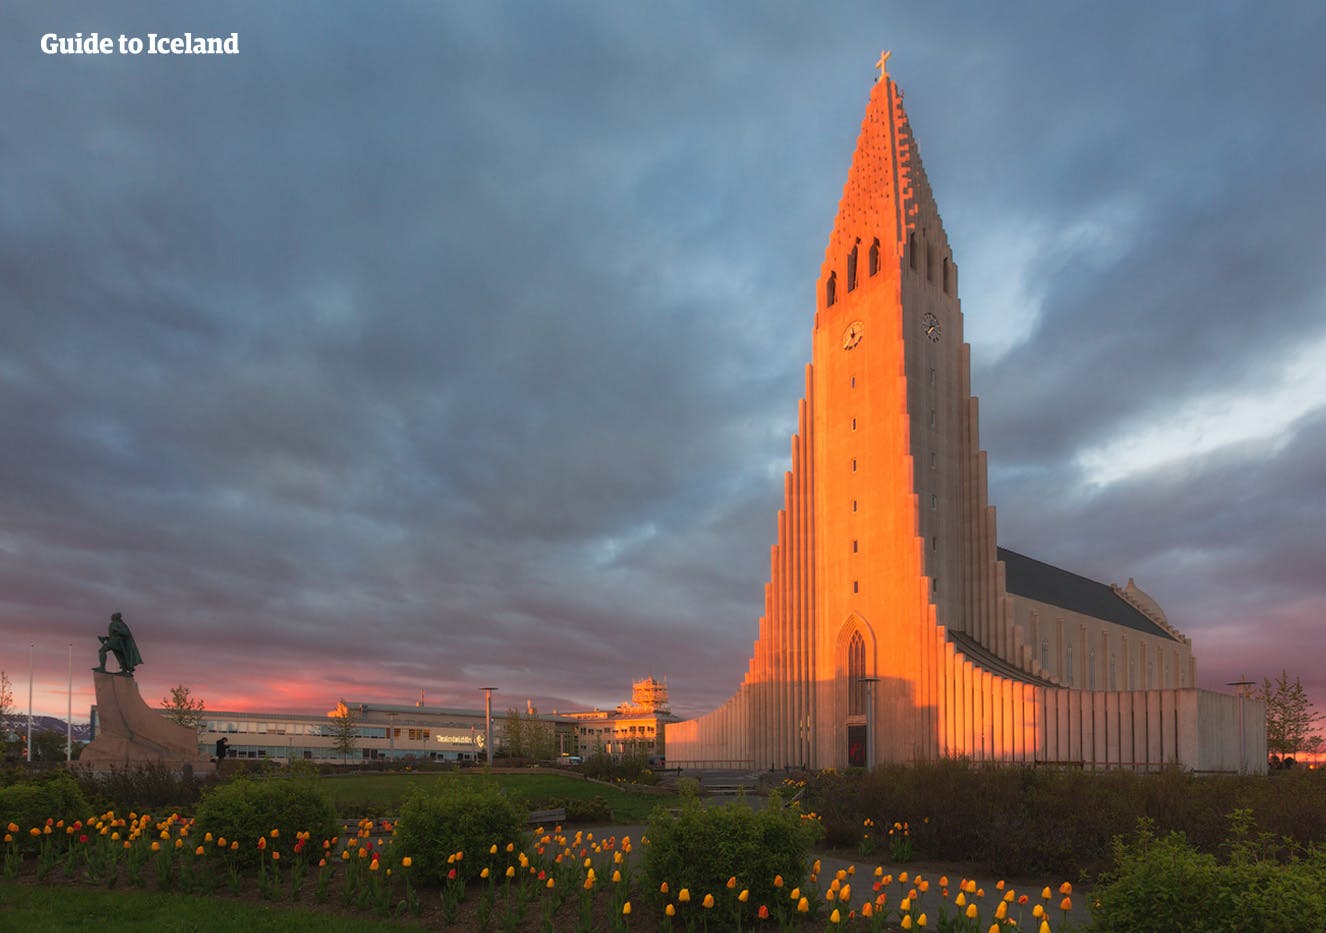 Hallgrímskirkja church towers over Reykjavík and many consider it to be the most iconic landmark in the city.